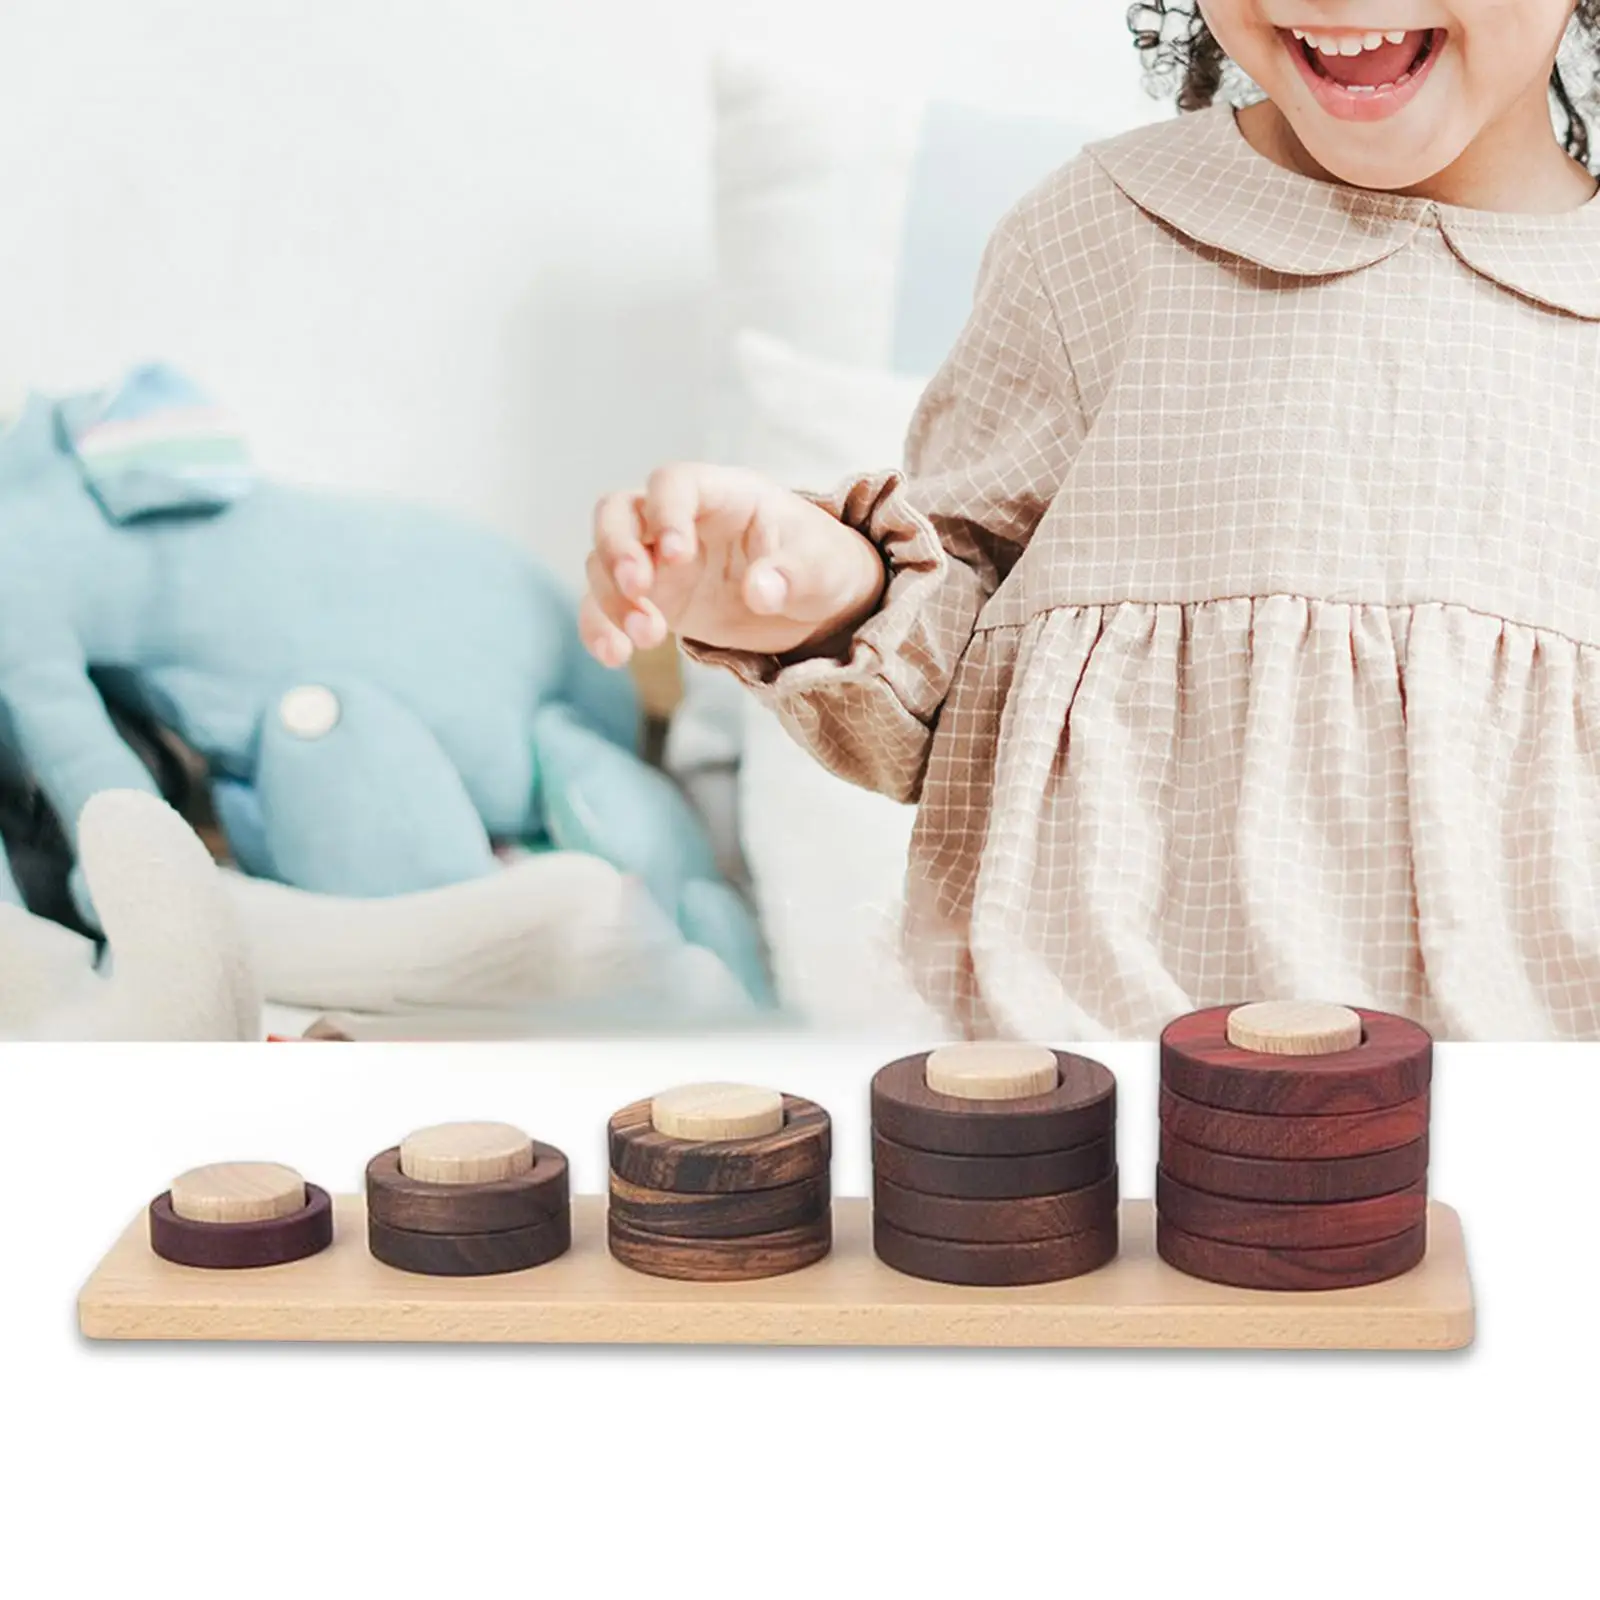 Wooden Stacking Toys Developmental Toy Fine Motor Skills Round Blocks Intelligence Toy for Children Toddlers Kids Holiday Gifts